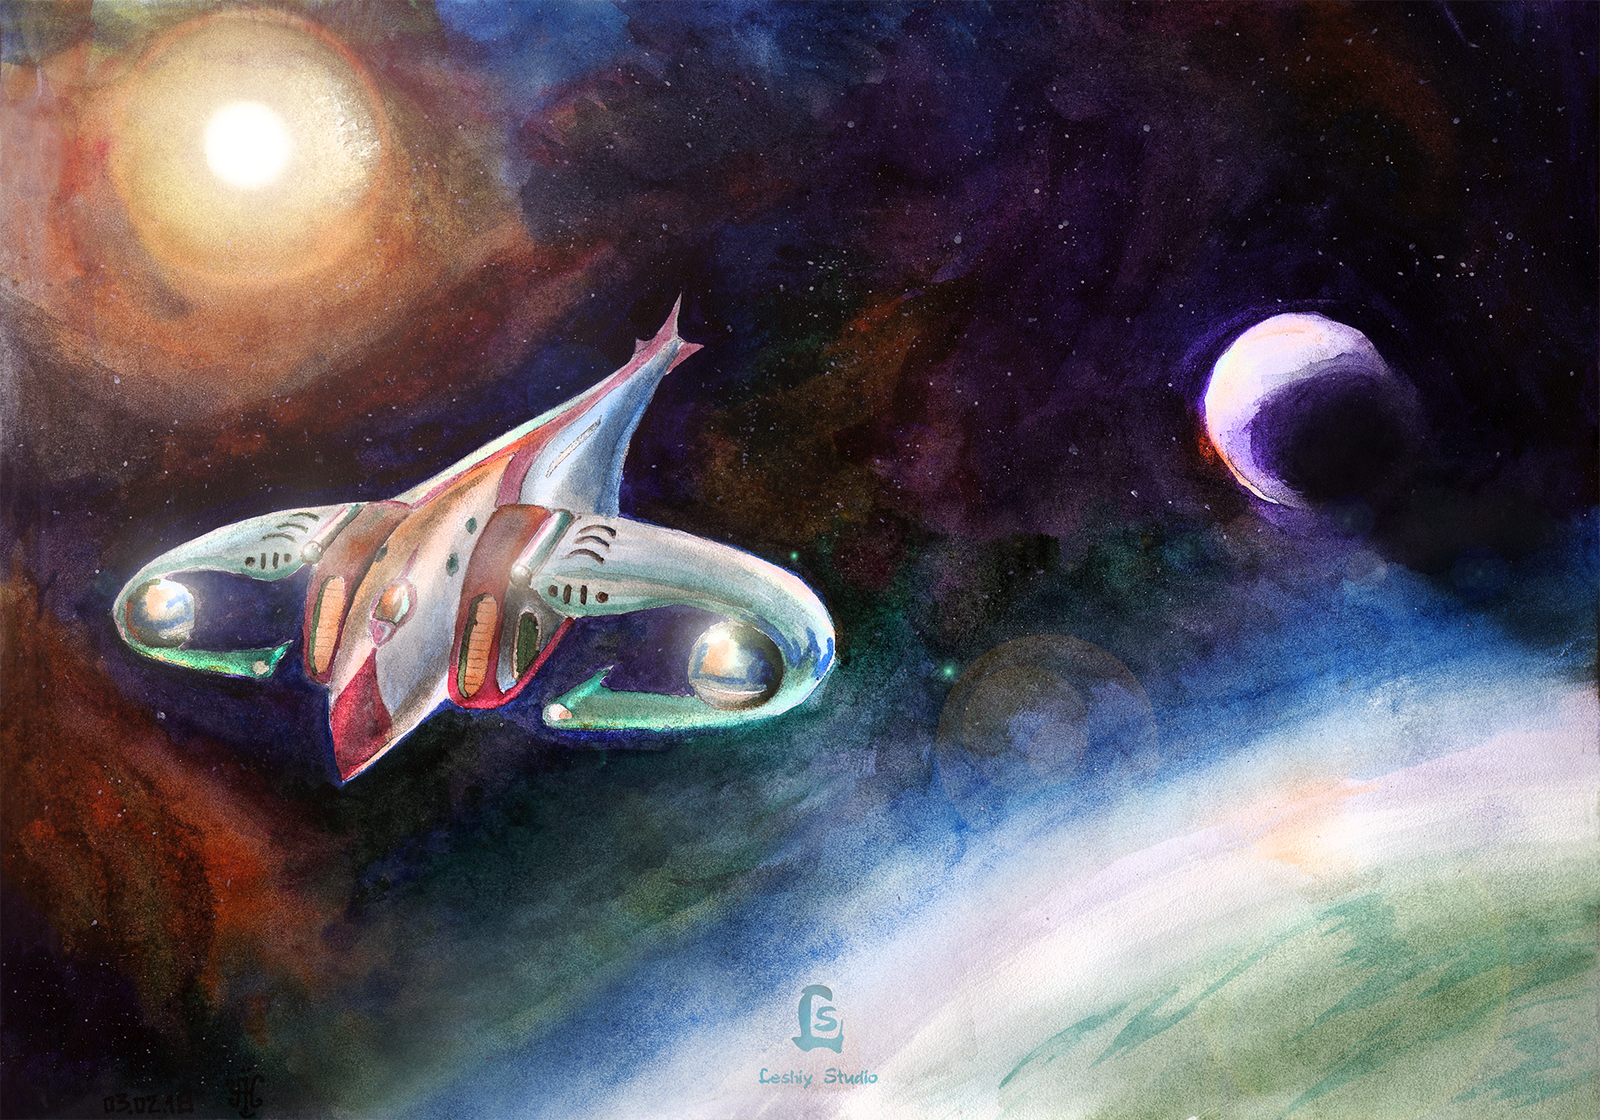 Nomad wandering the galaxies - My, Space, Watercolor, Drawing, Fantasy, Life stories, Painting, Fantastic story, Spaceship, Longpost